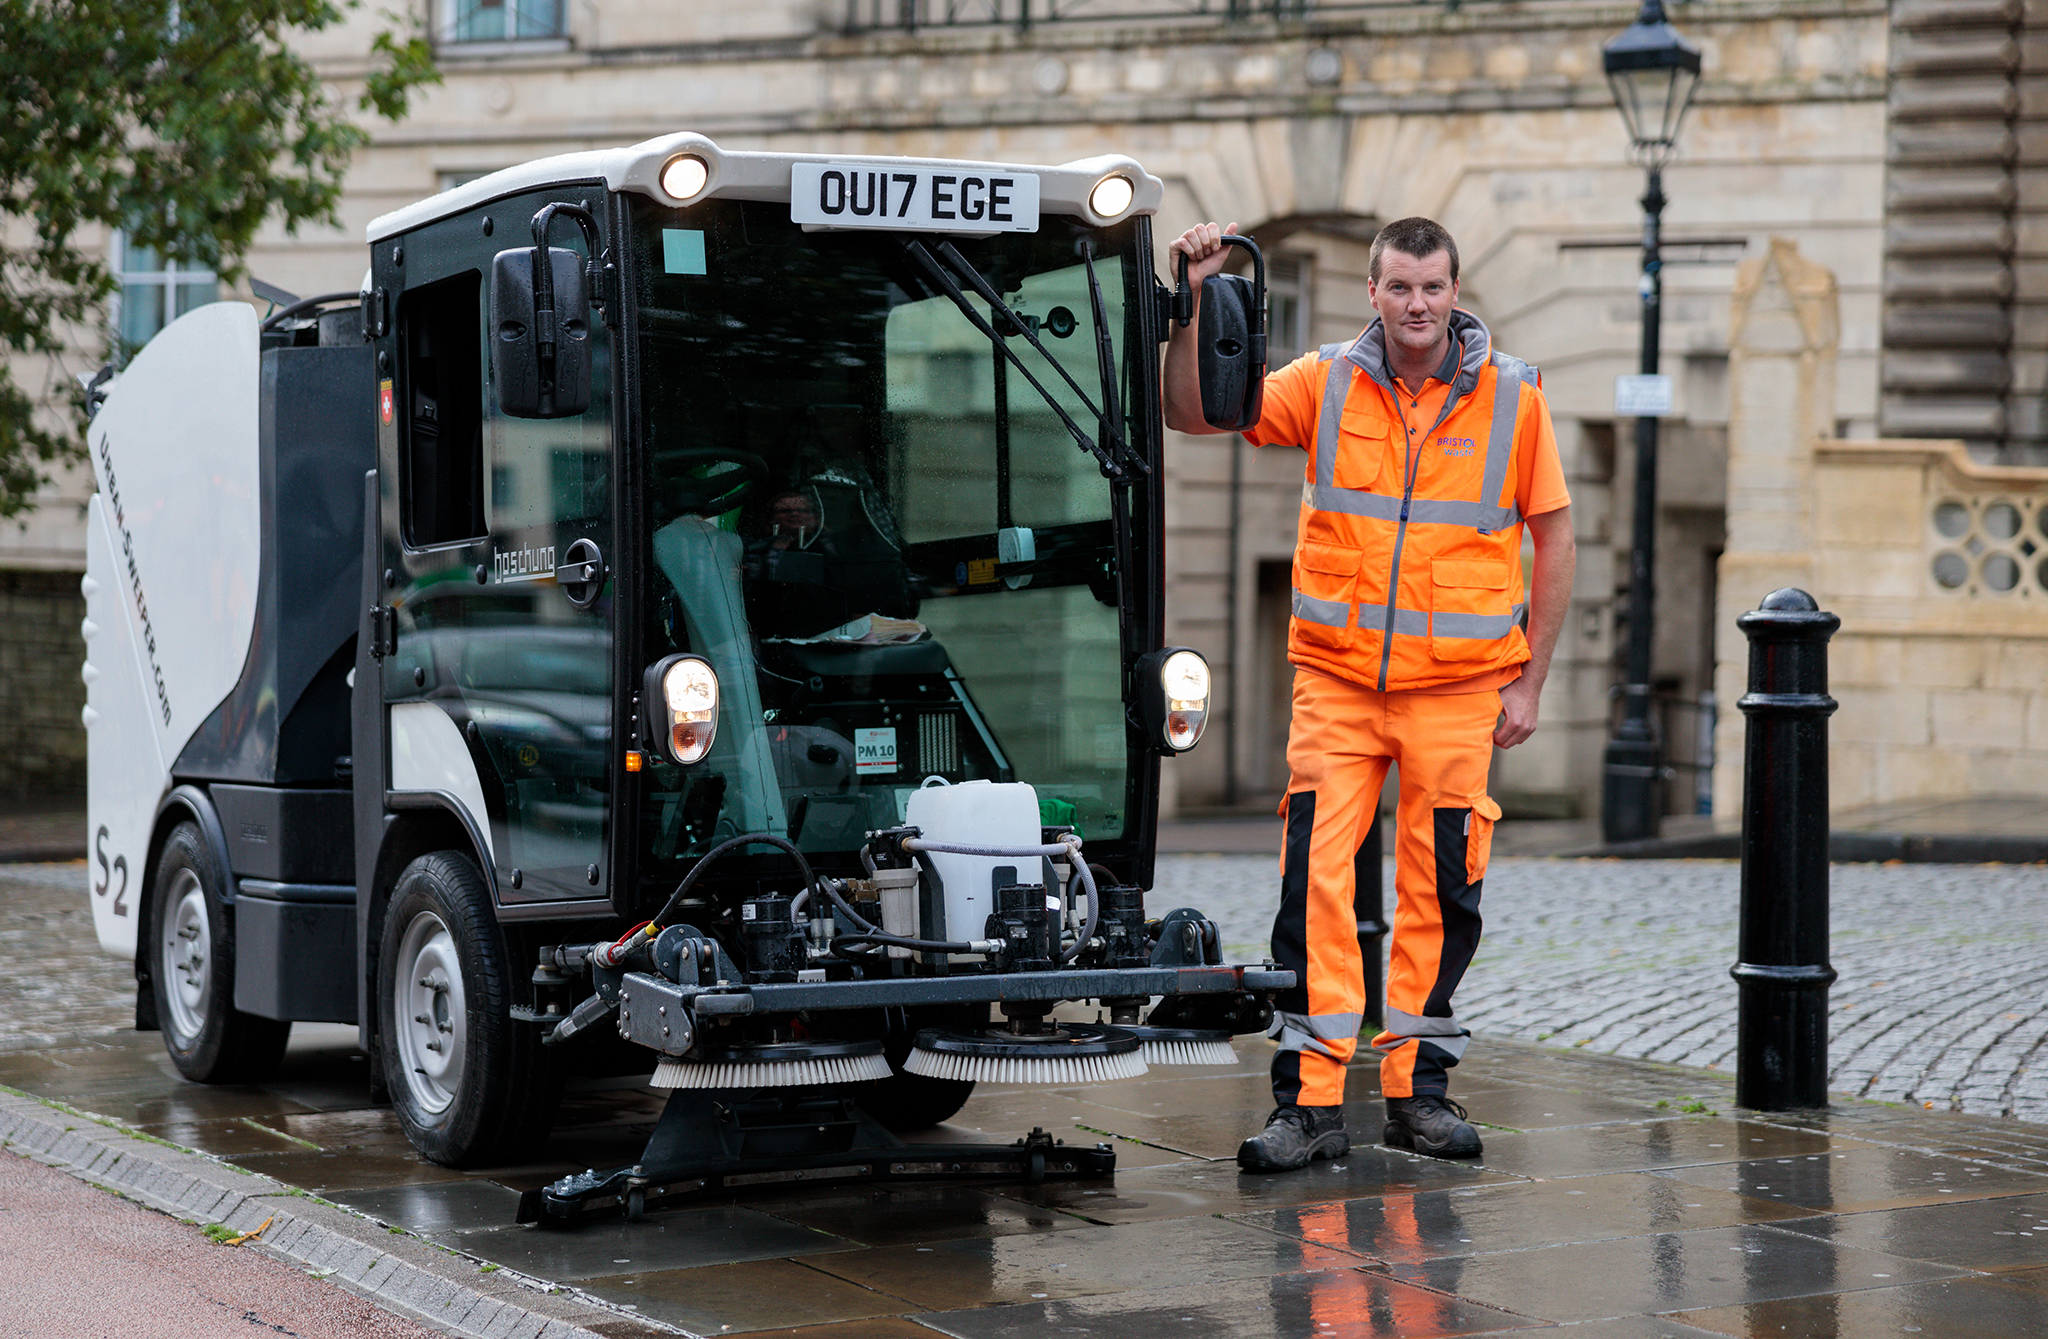 A Bristol Waste street cleansing operative standing next to a street sweeper